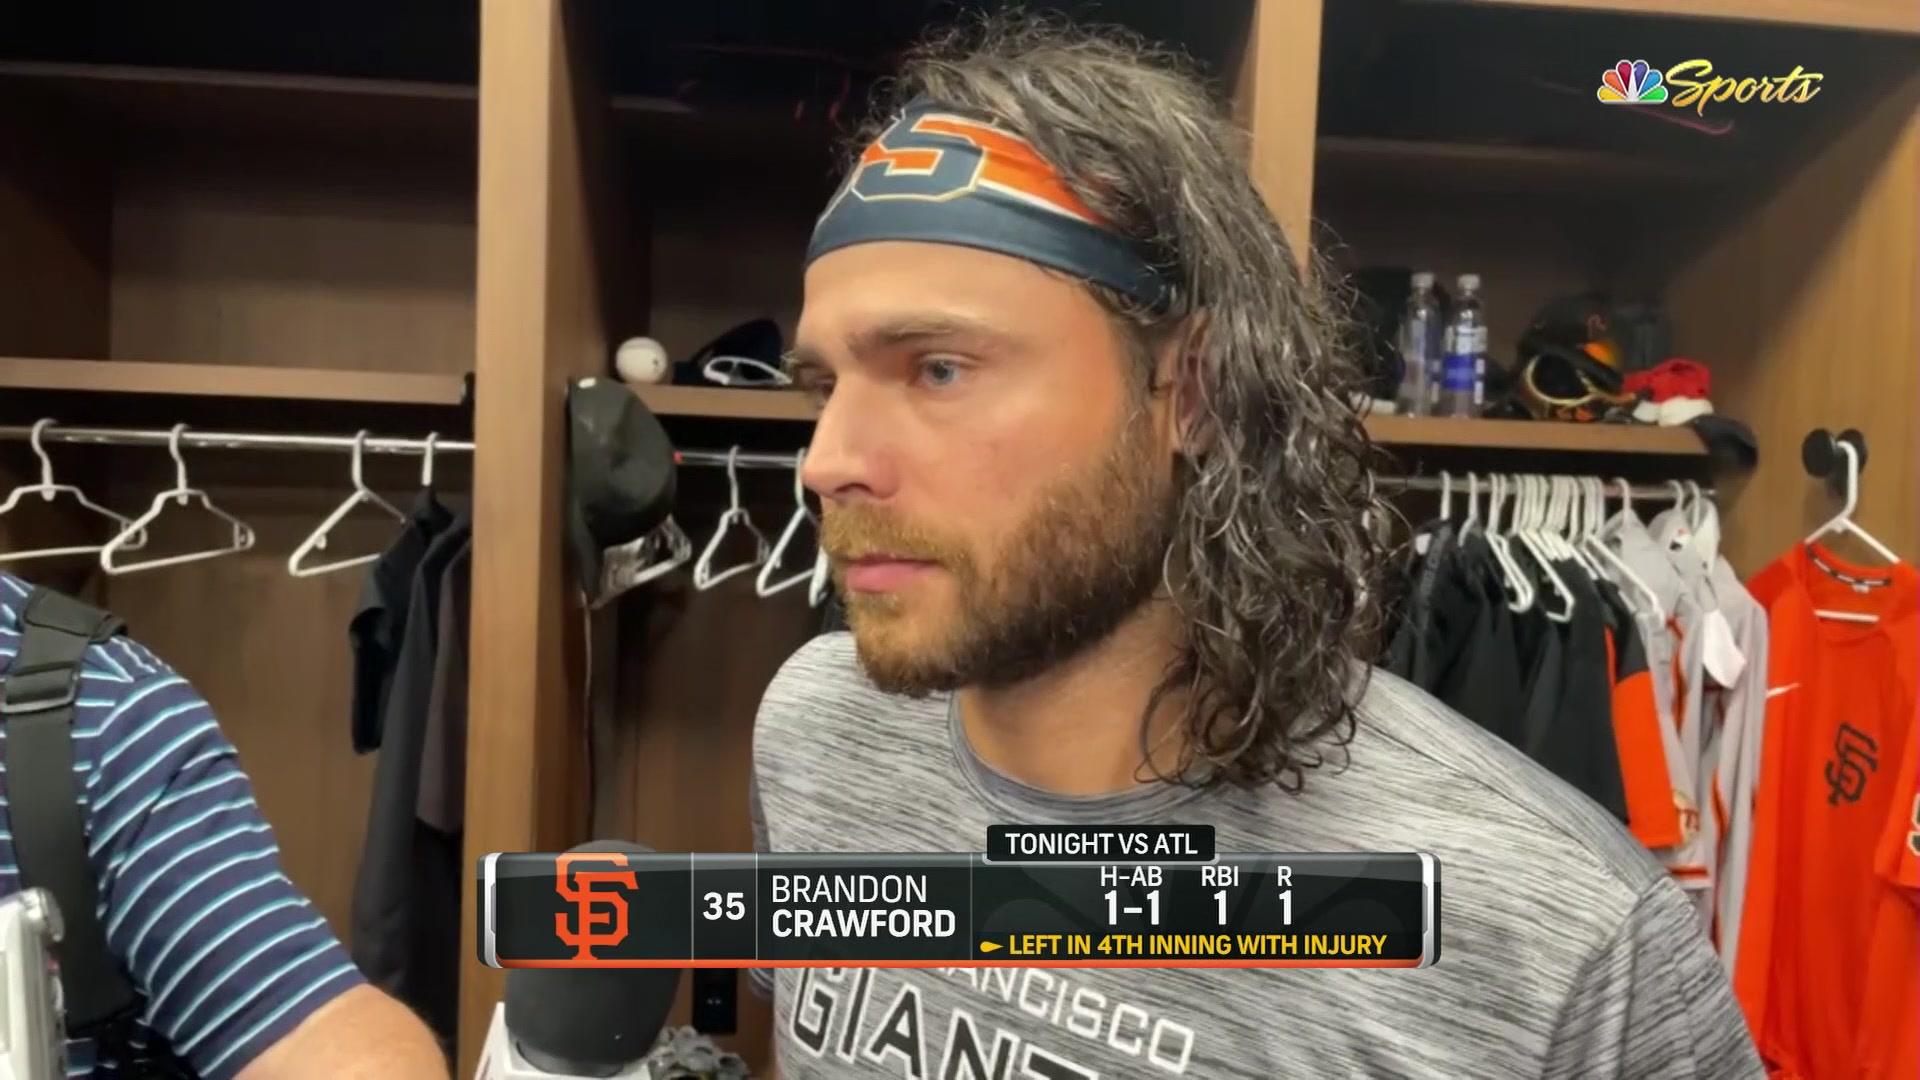 Giants notes: Brandon Crawford's sore knee opens a host of